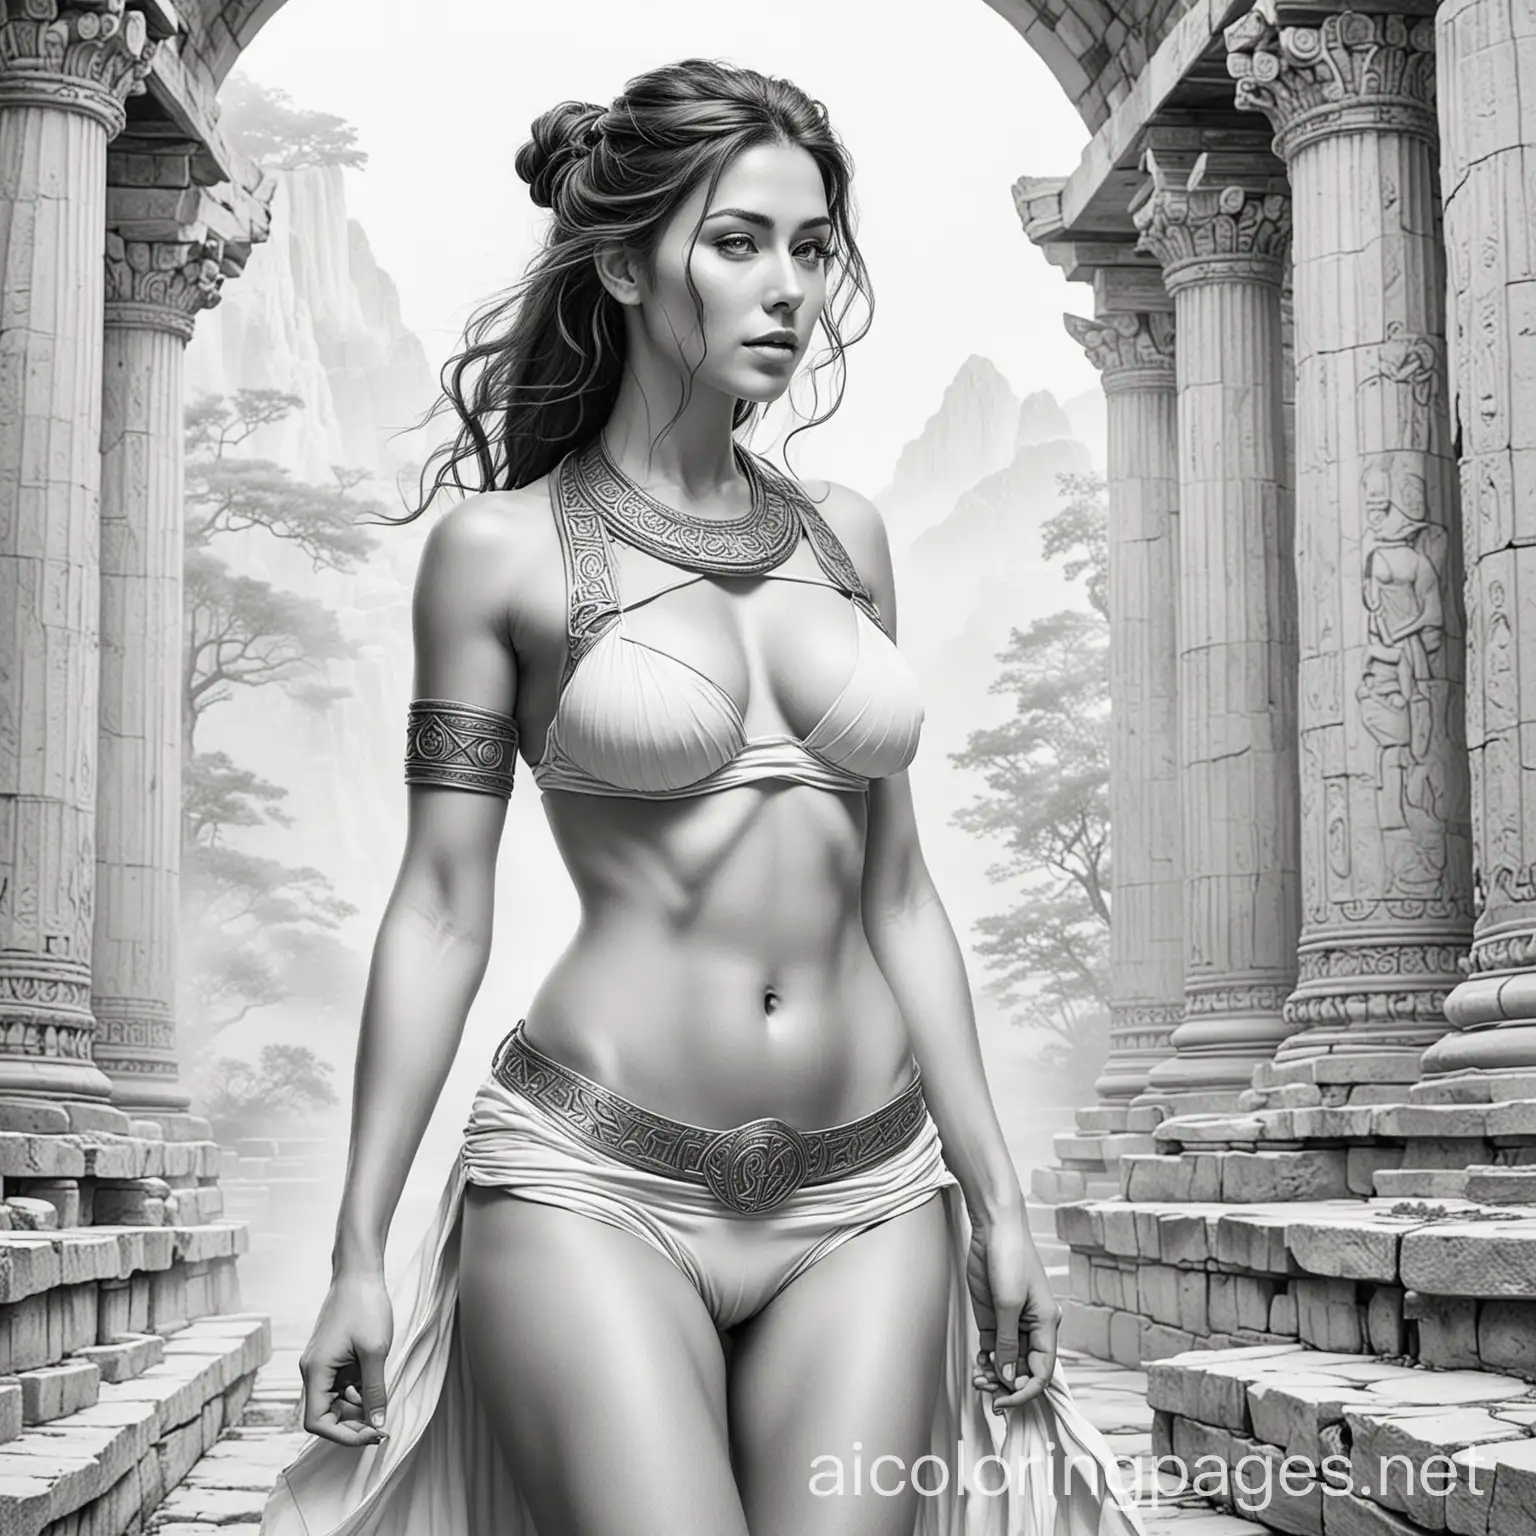 Sweaty Half naked adventurer in temple of a goddess, Coloring Page, black and white, line art, white background, Simplicity, Ample White Space. The background of the coloring page is plain white to make it easy for young children to color within the lines. The outlines of all the subjects are easy to distinguish, making it simple for kids to color without too much difficulty